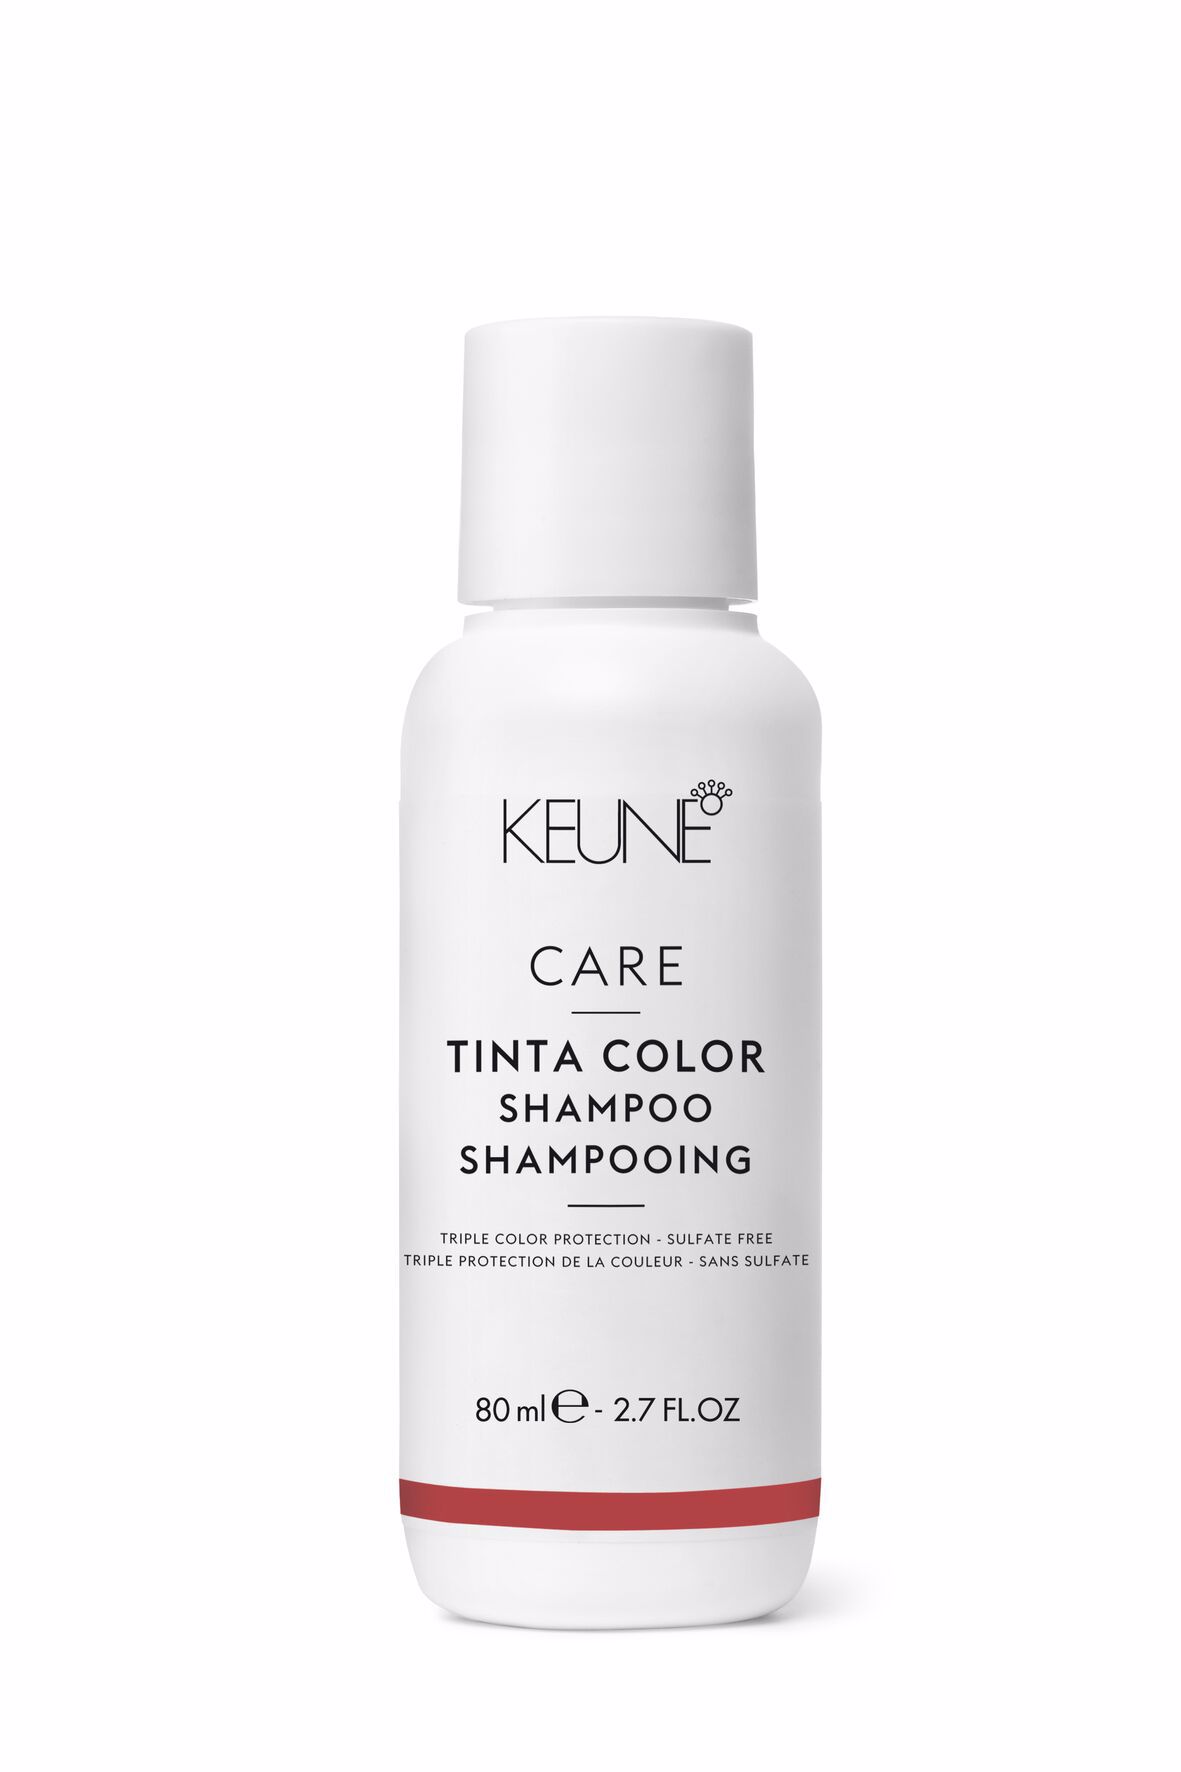 Changed you hair color? Discover professional hair care for colored hair with Tinta Color Care Shampoo. Anti-Frizz & more volume. Preserves salon-fresh color. Gluten-free. Available on Keune.ch.